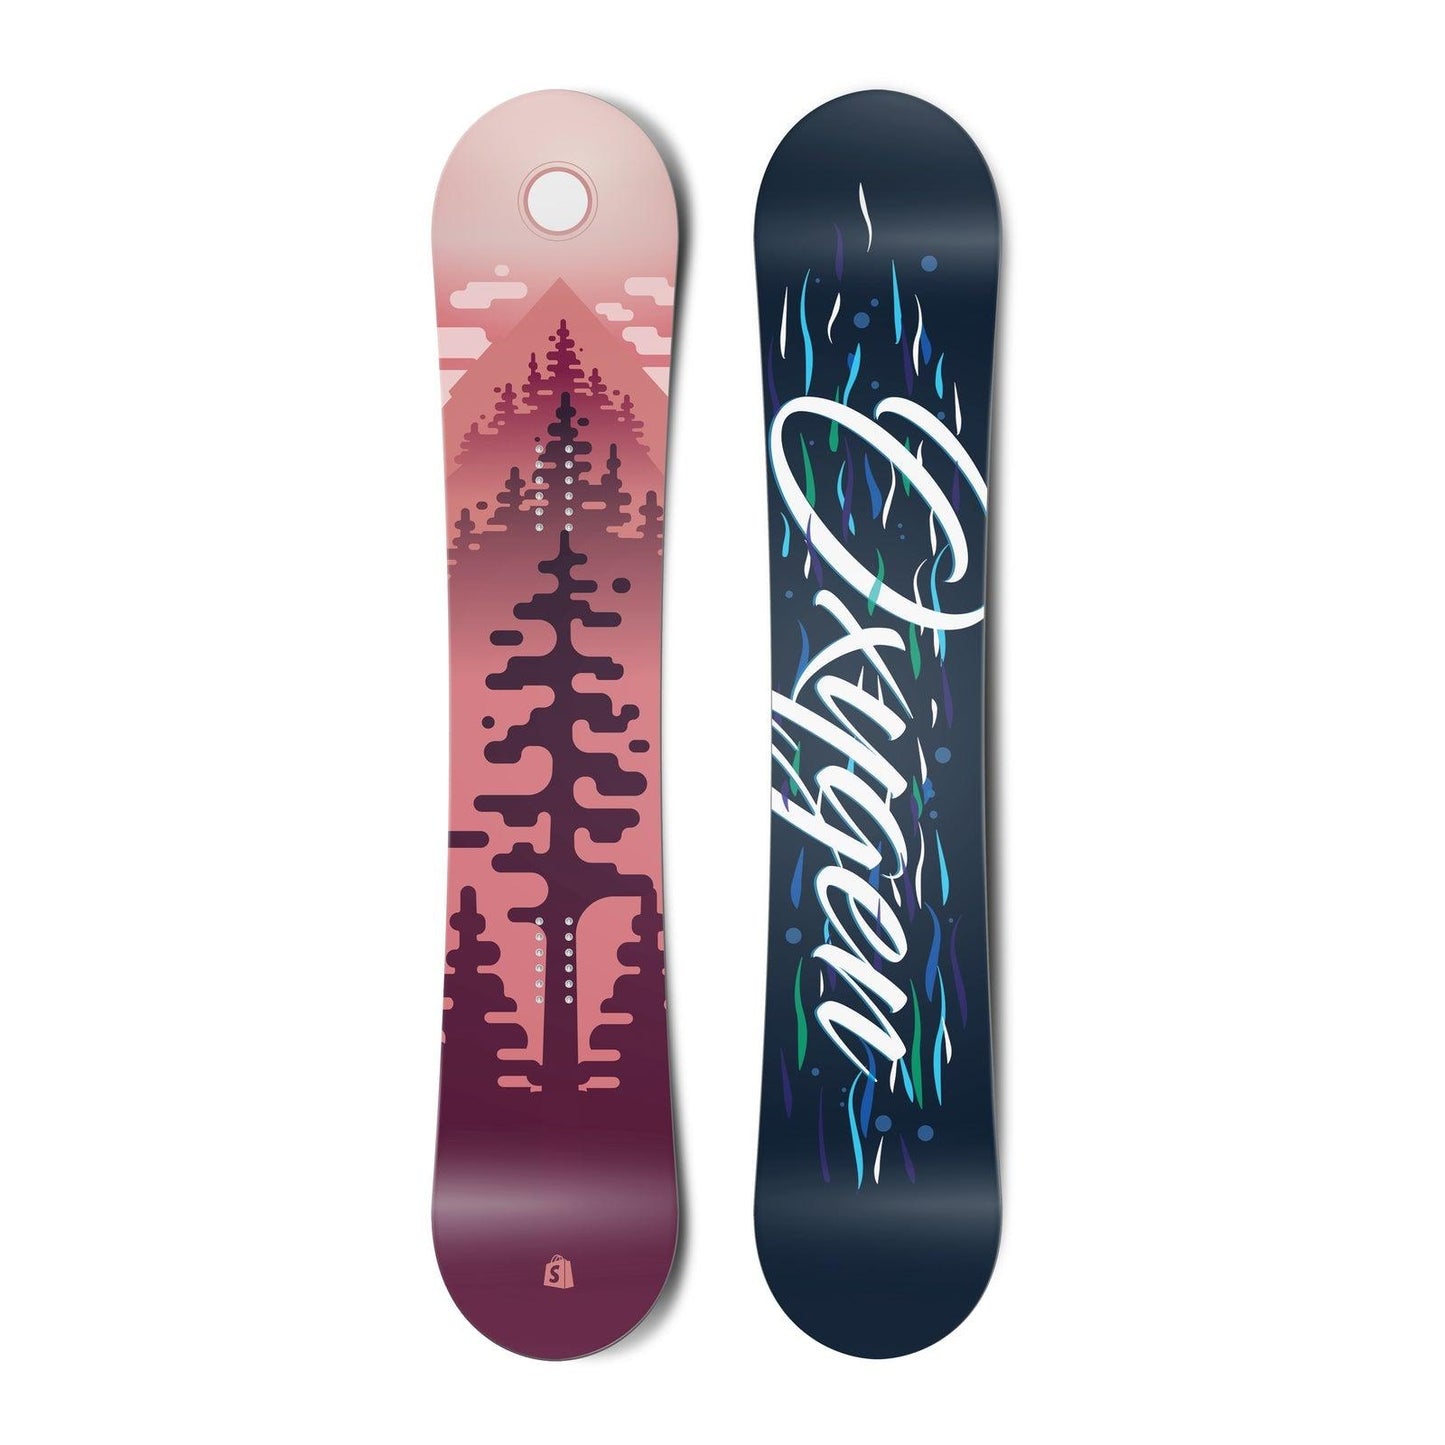 The Complete Snowboard